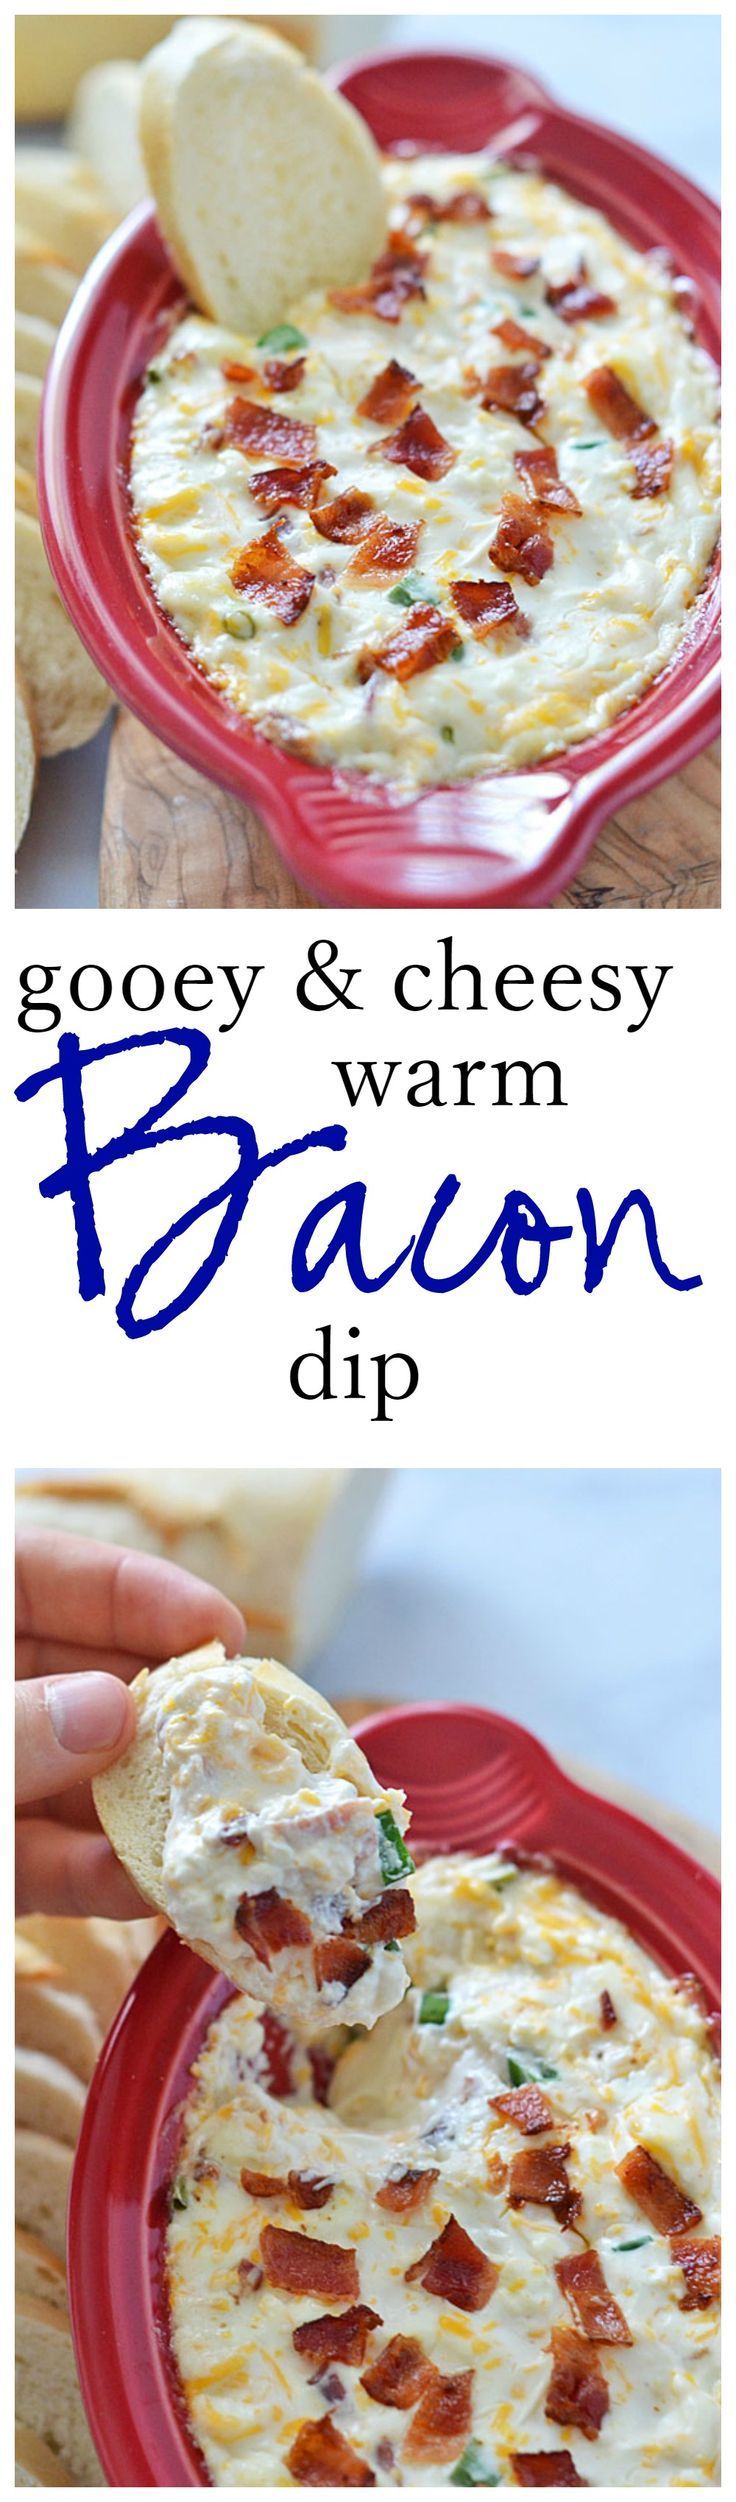 Gooey and Cheesy Warm Bacon Dip – Comes together in less than 30 minutes and is the perfect crowd-pleasing appetizer!